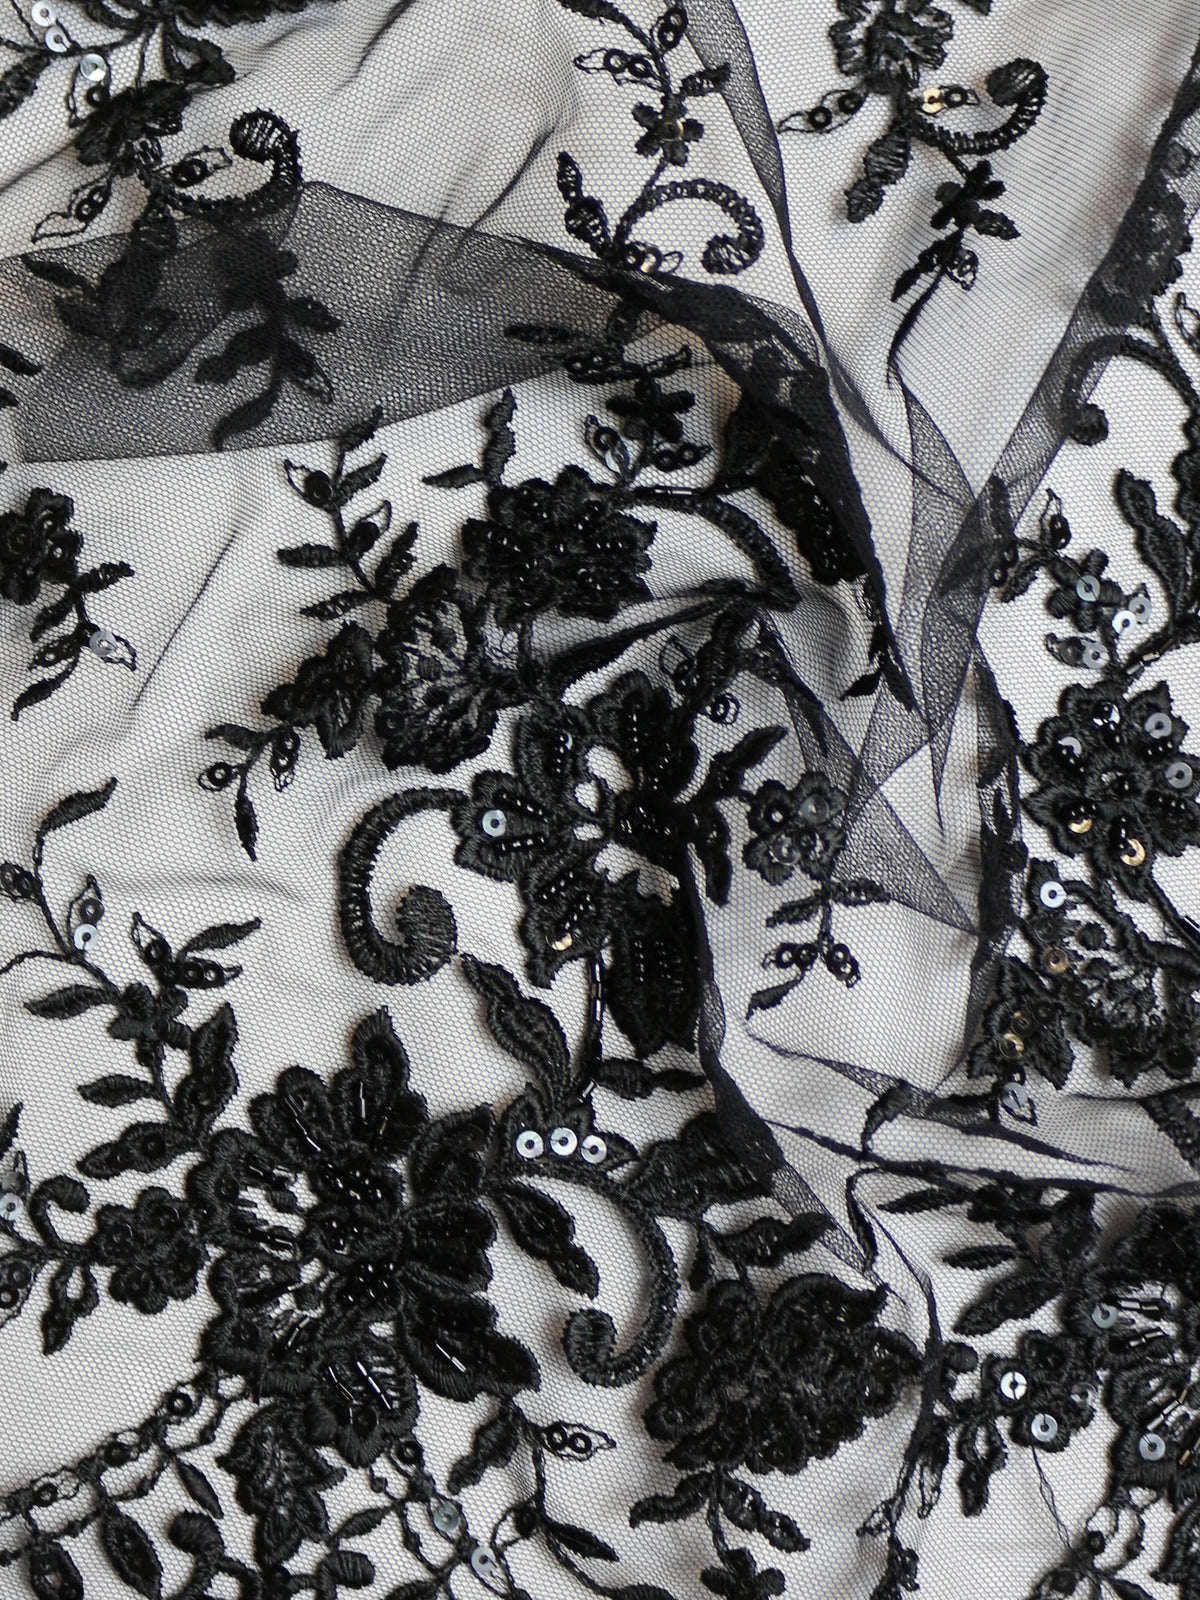 Black Floral Lace, Fabric By The Yard, Black Lace Fabric 